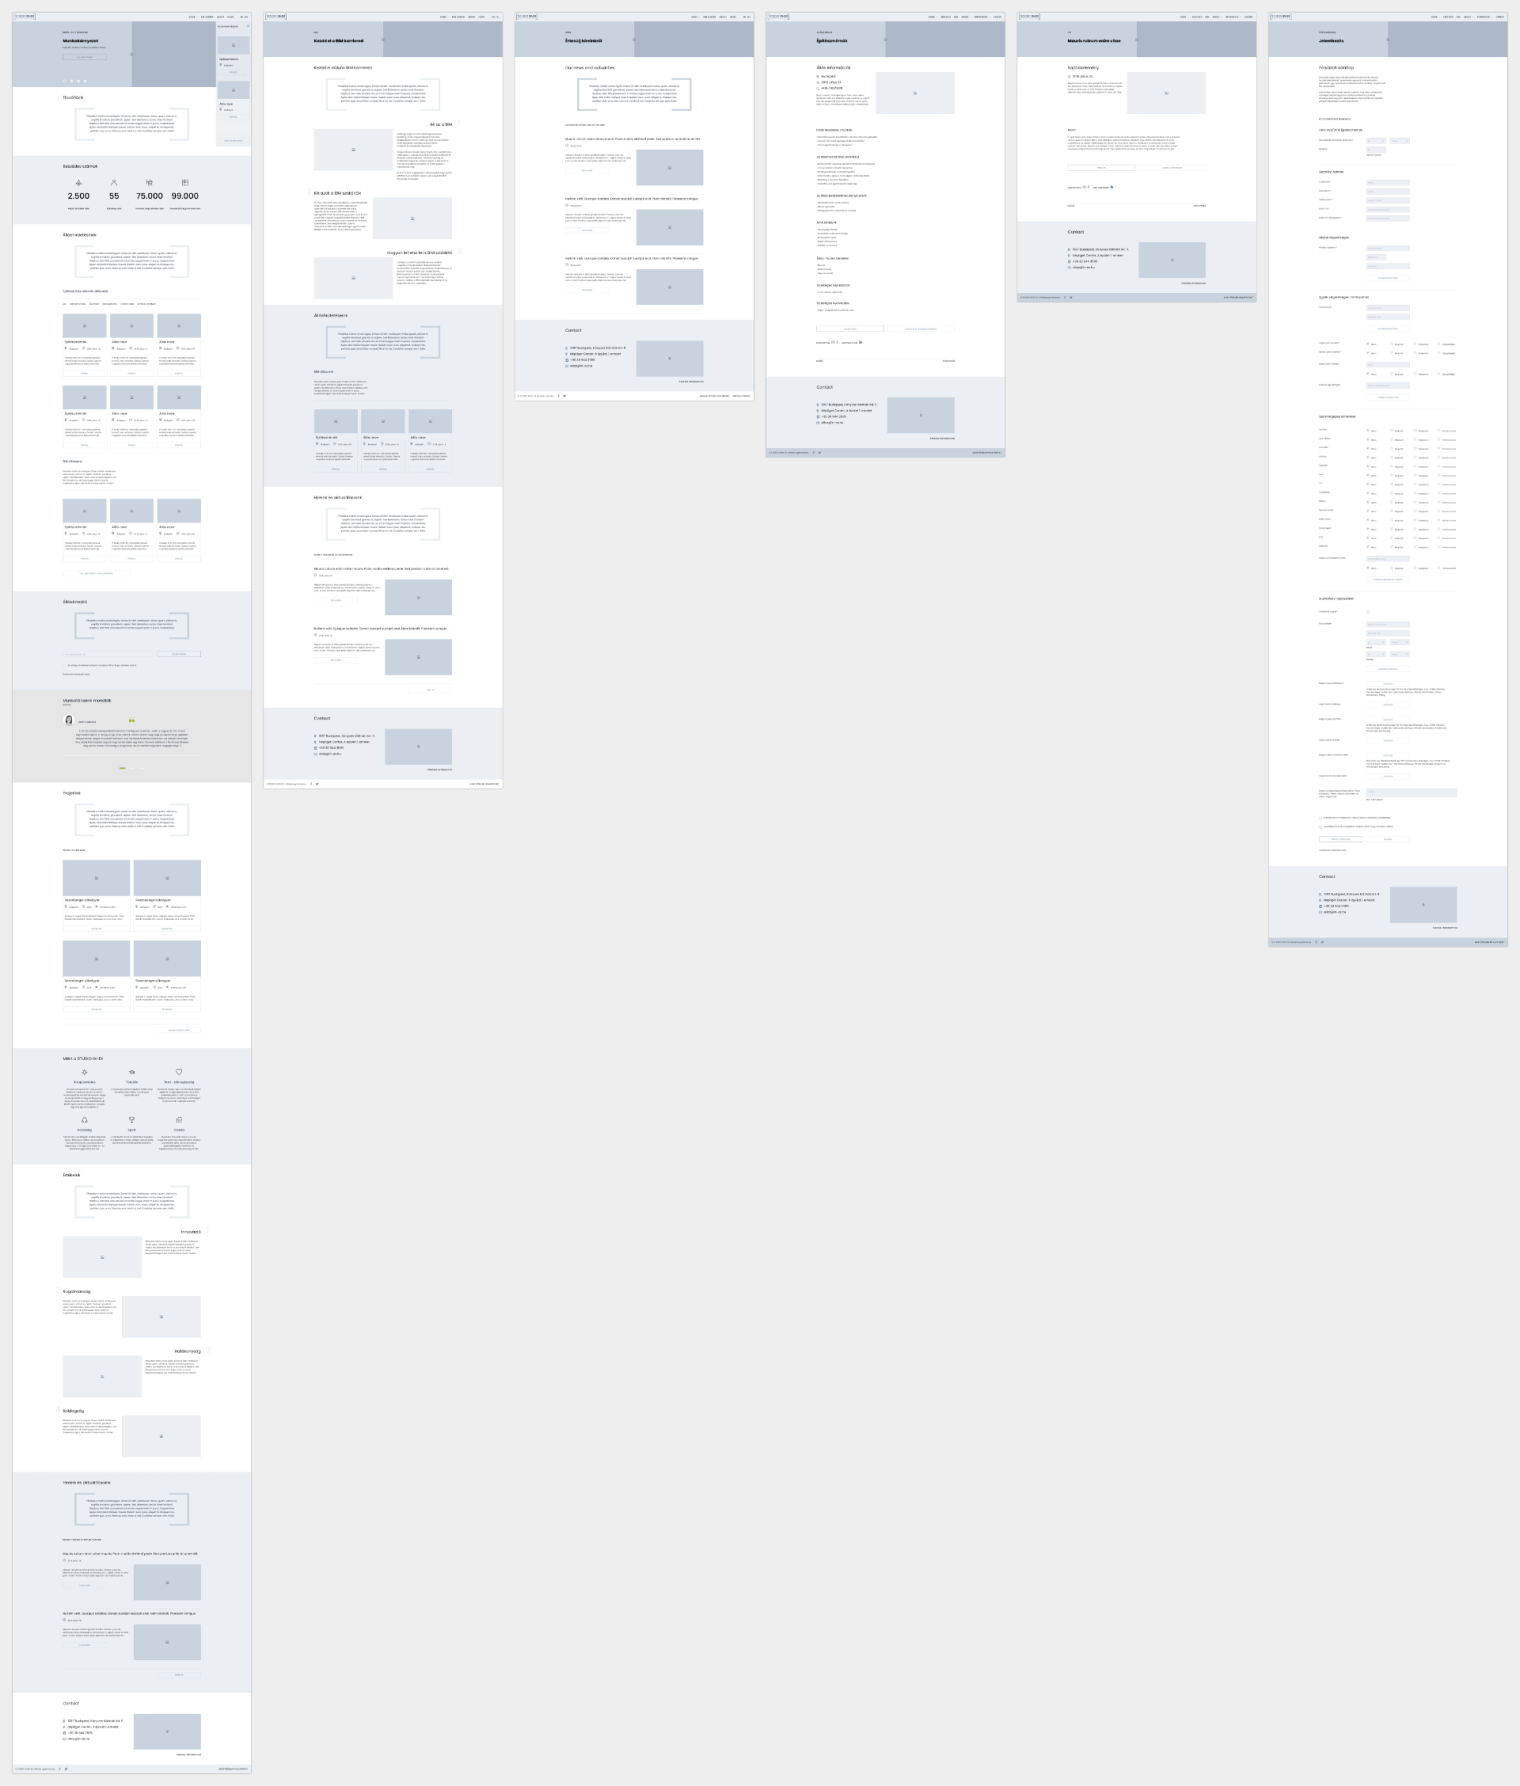 Designing wireframes for career portal’s pages